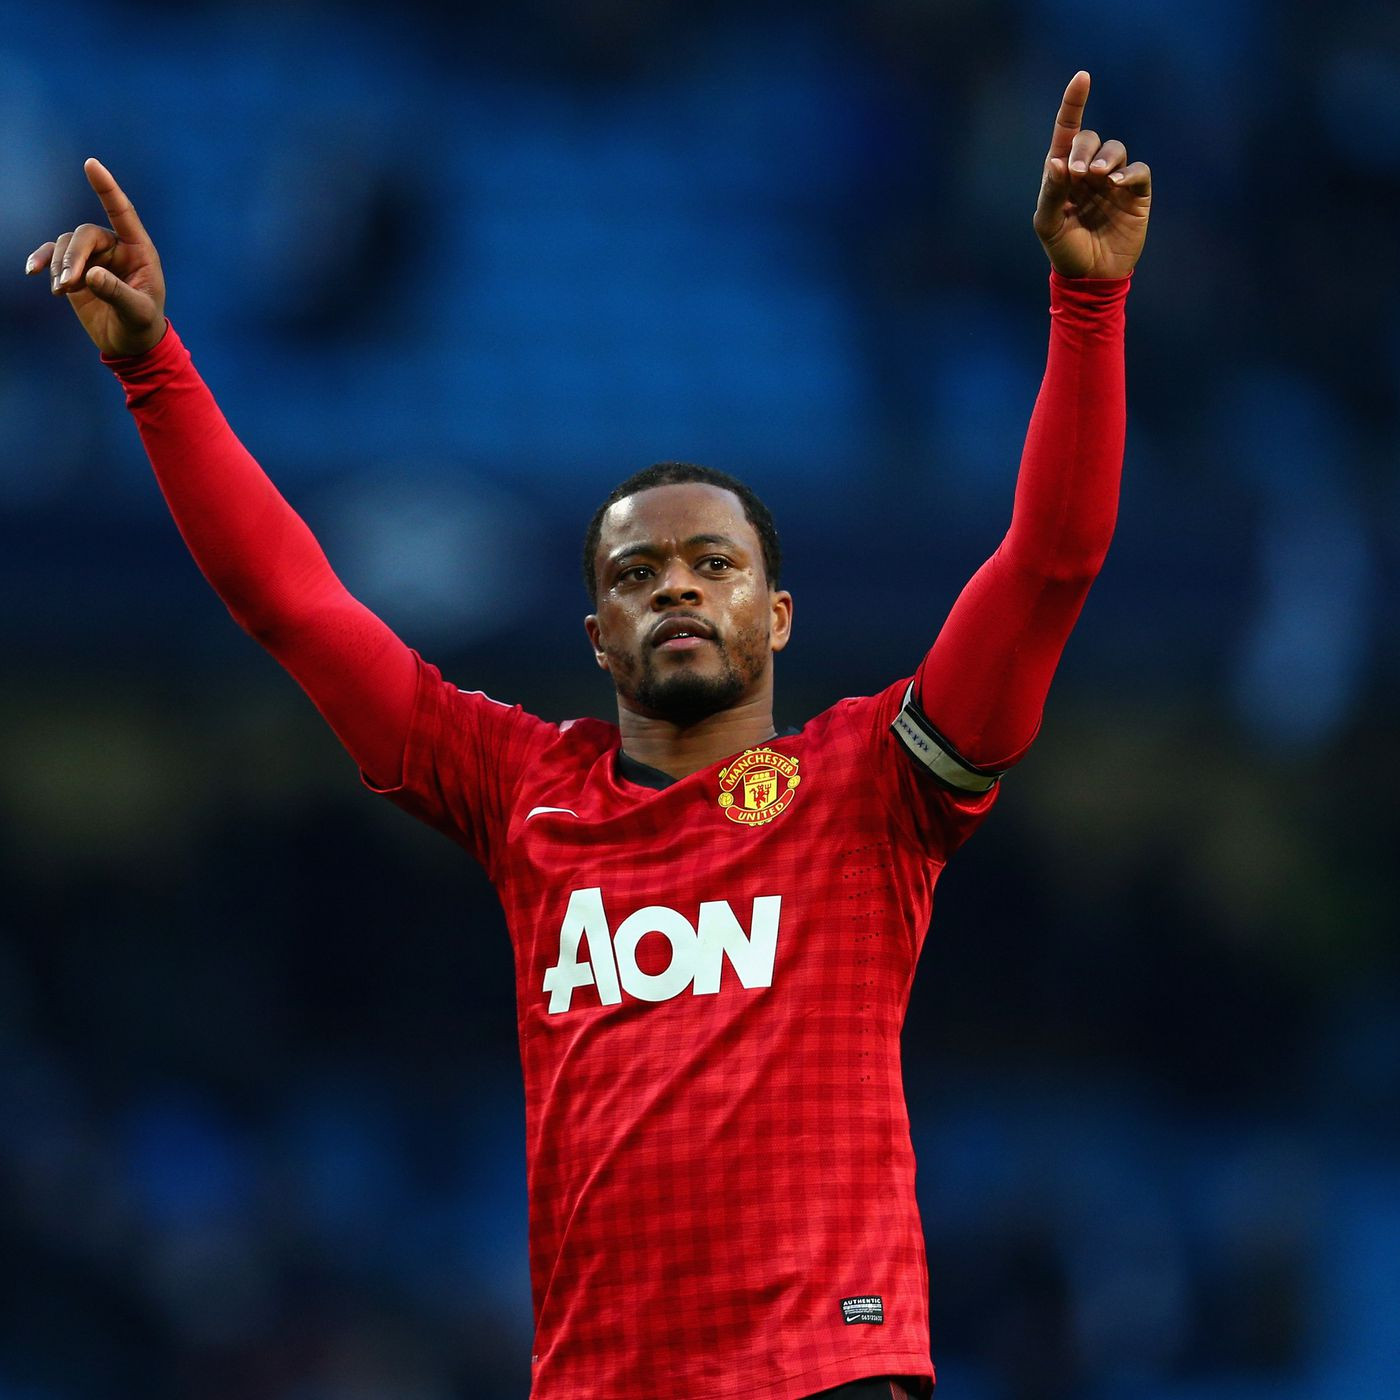 Patrice Evra opens up on the difficult moments he faced on his way to the top. 49